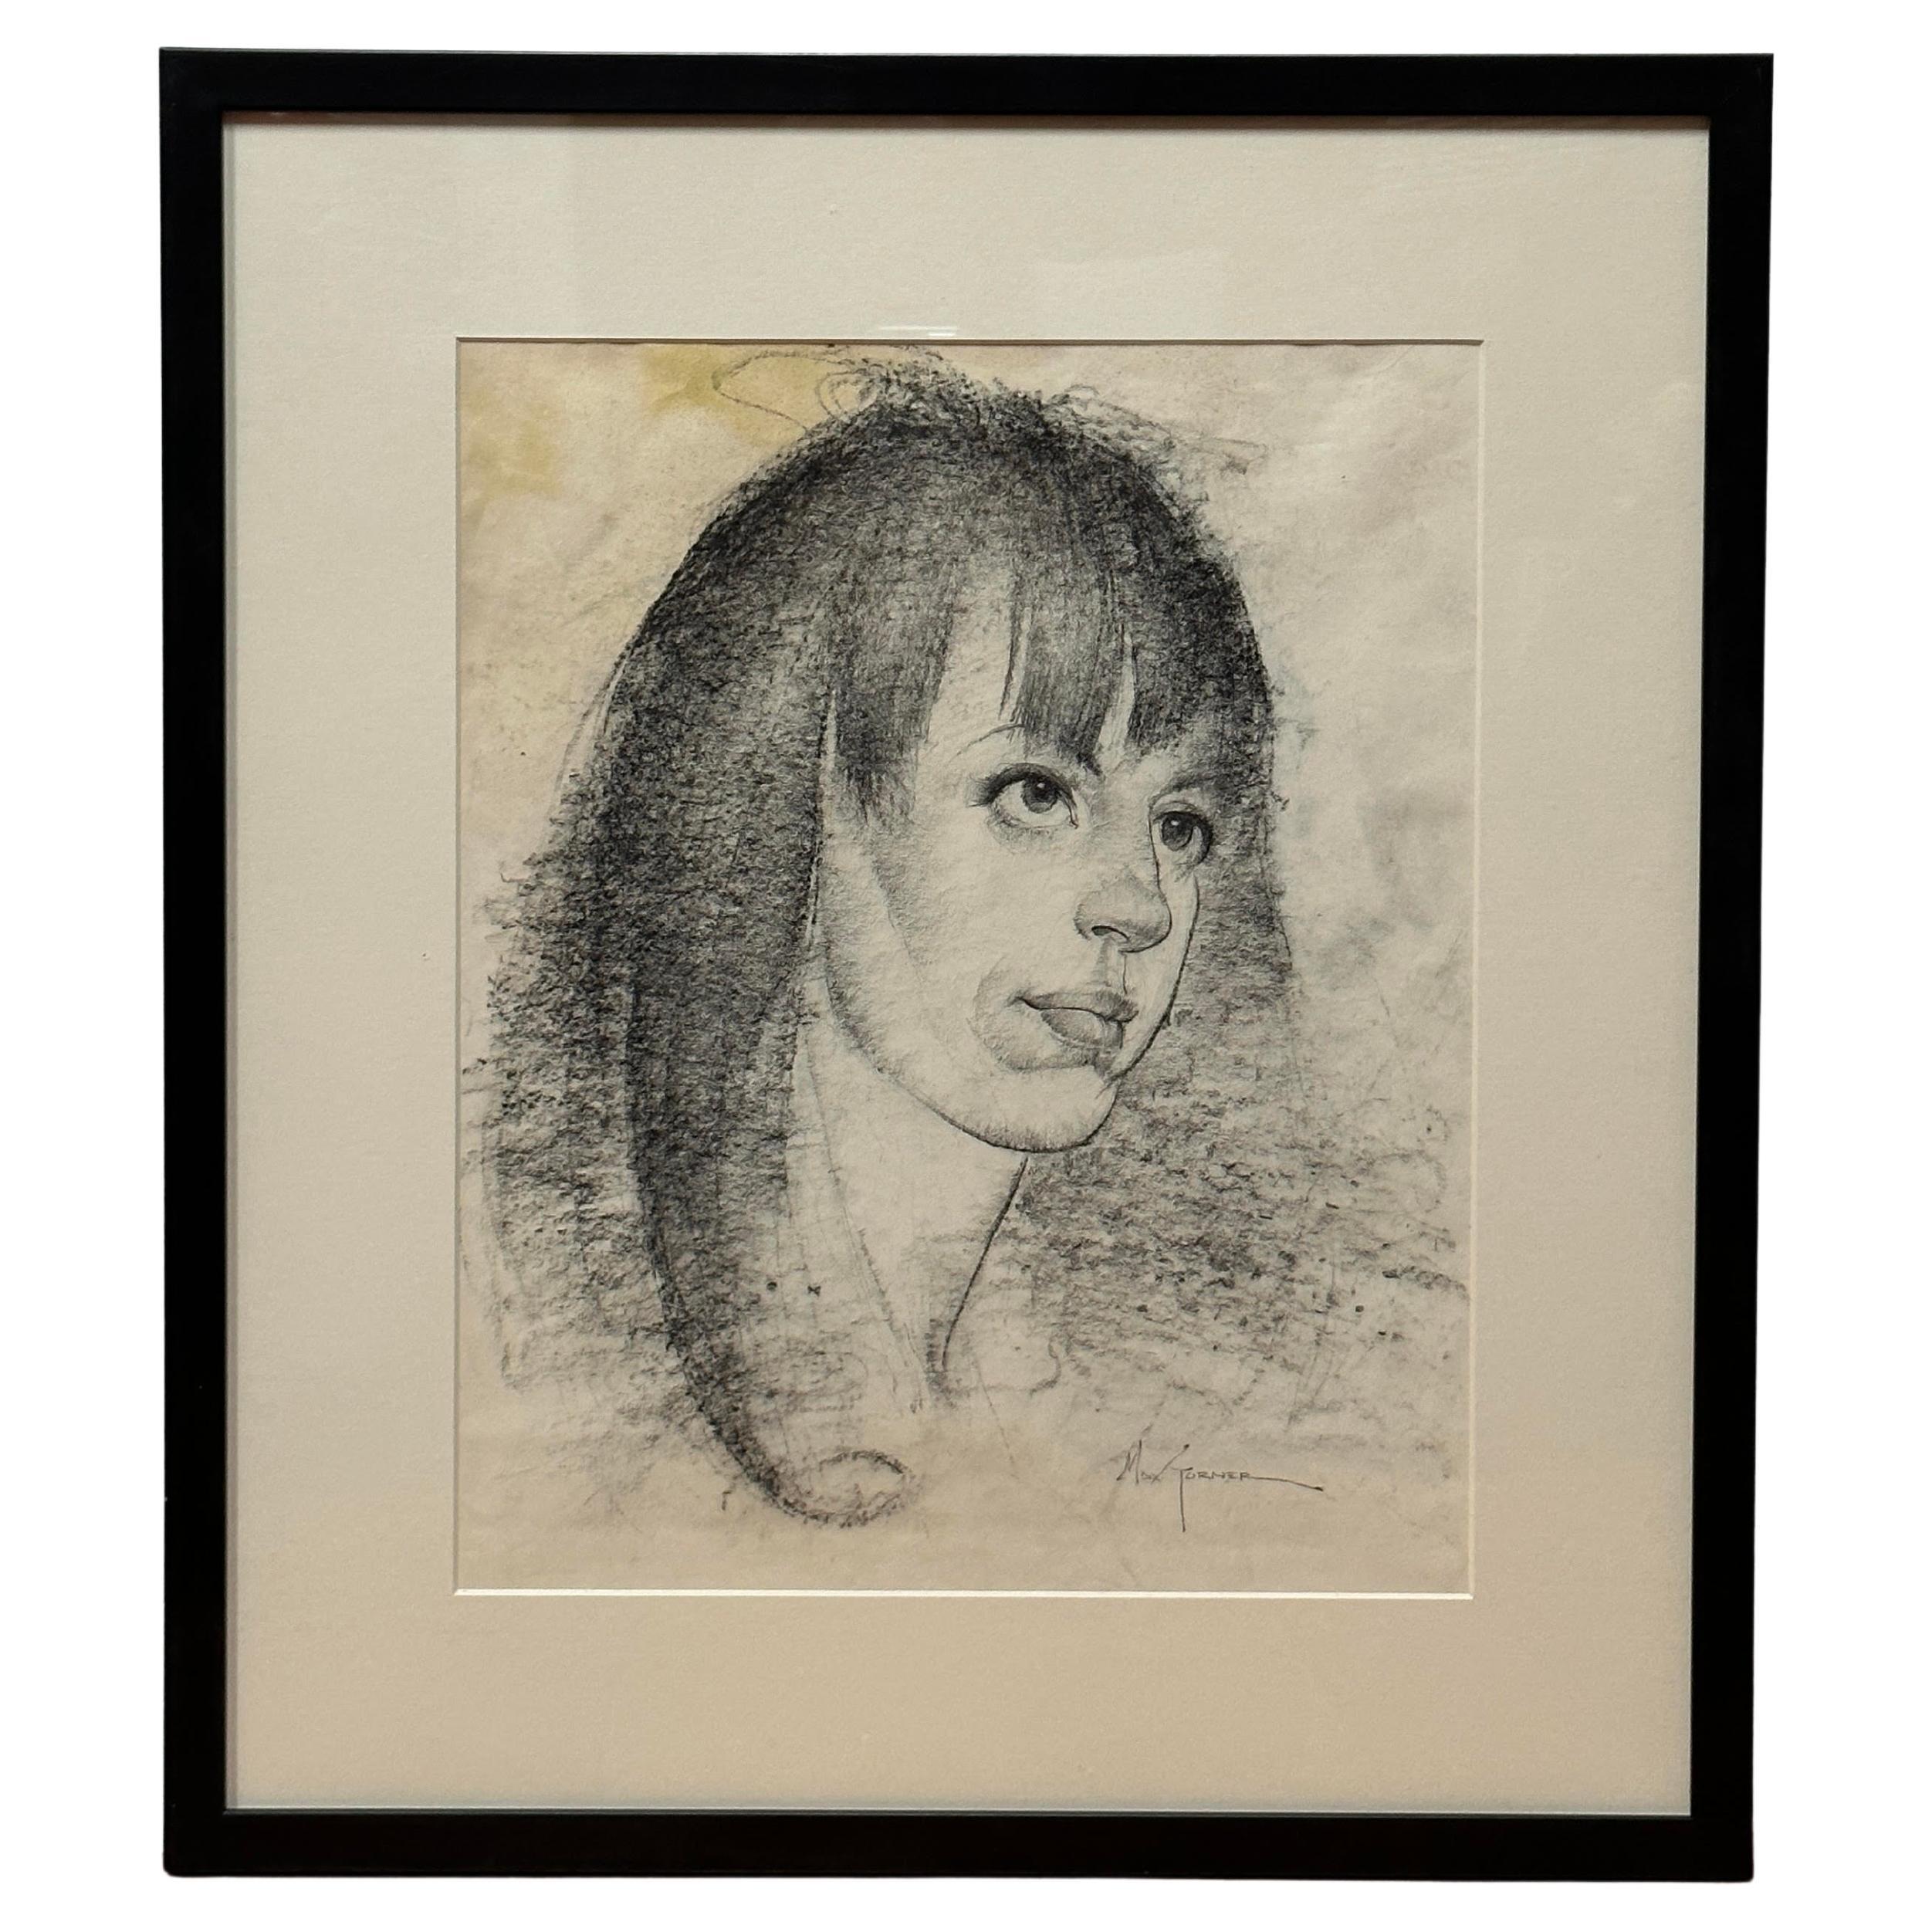 Black and White Charcoal Portrait of a Woman by Max Turner - Art by MAX TURNER